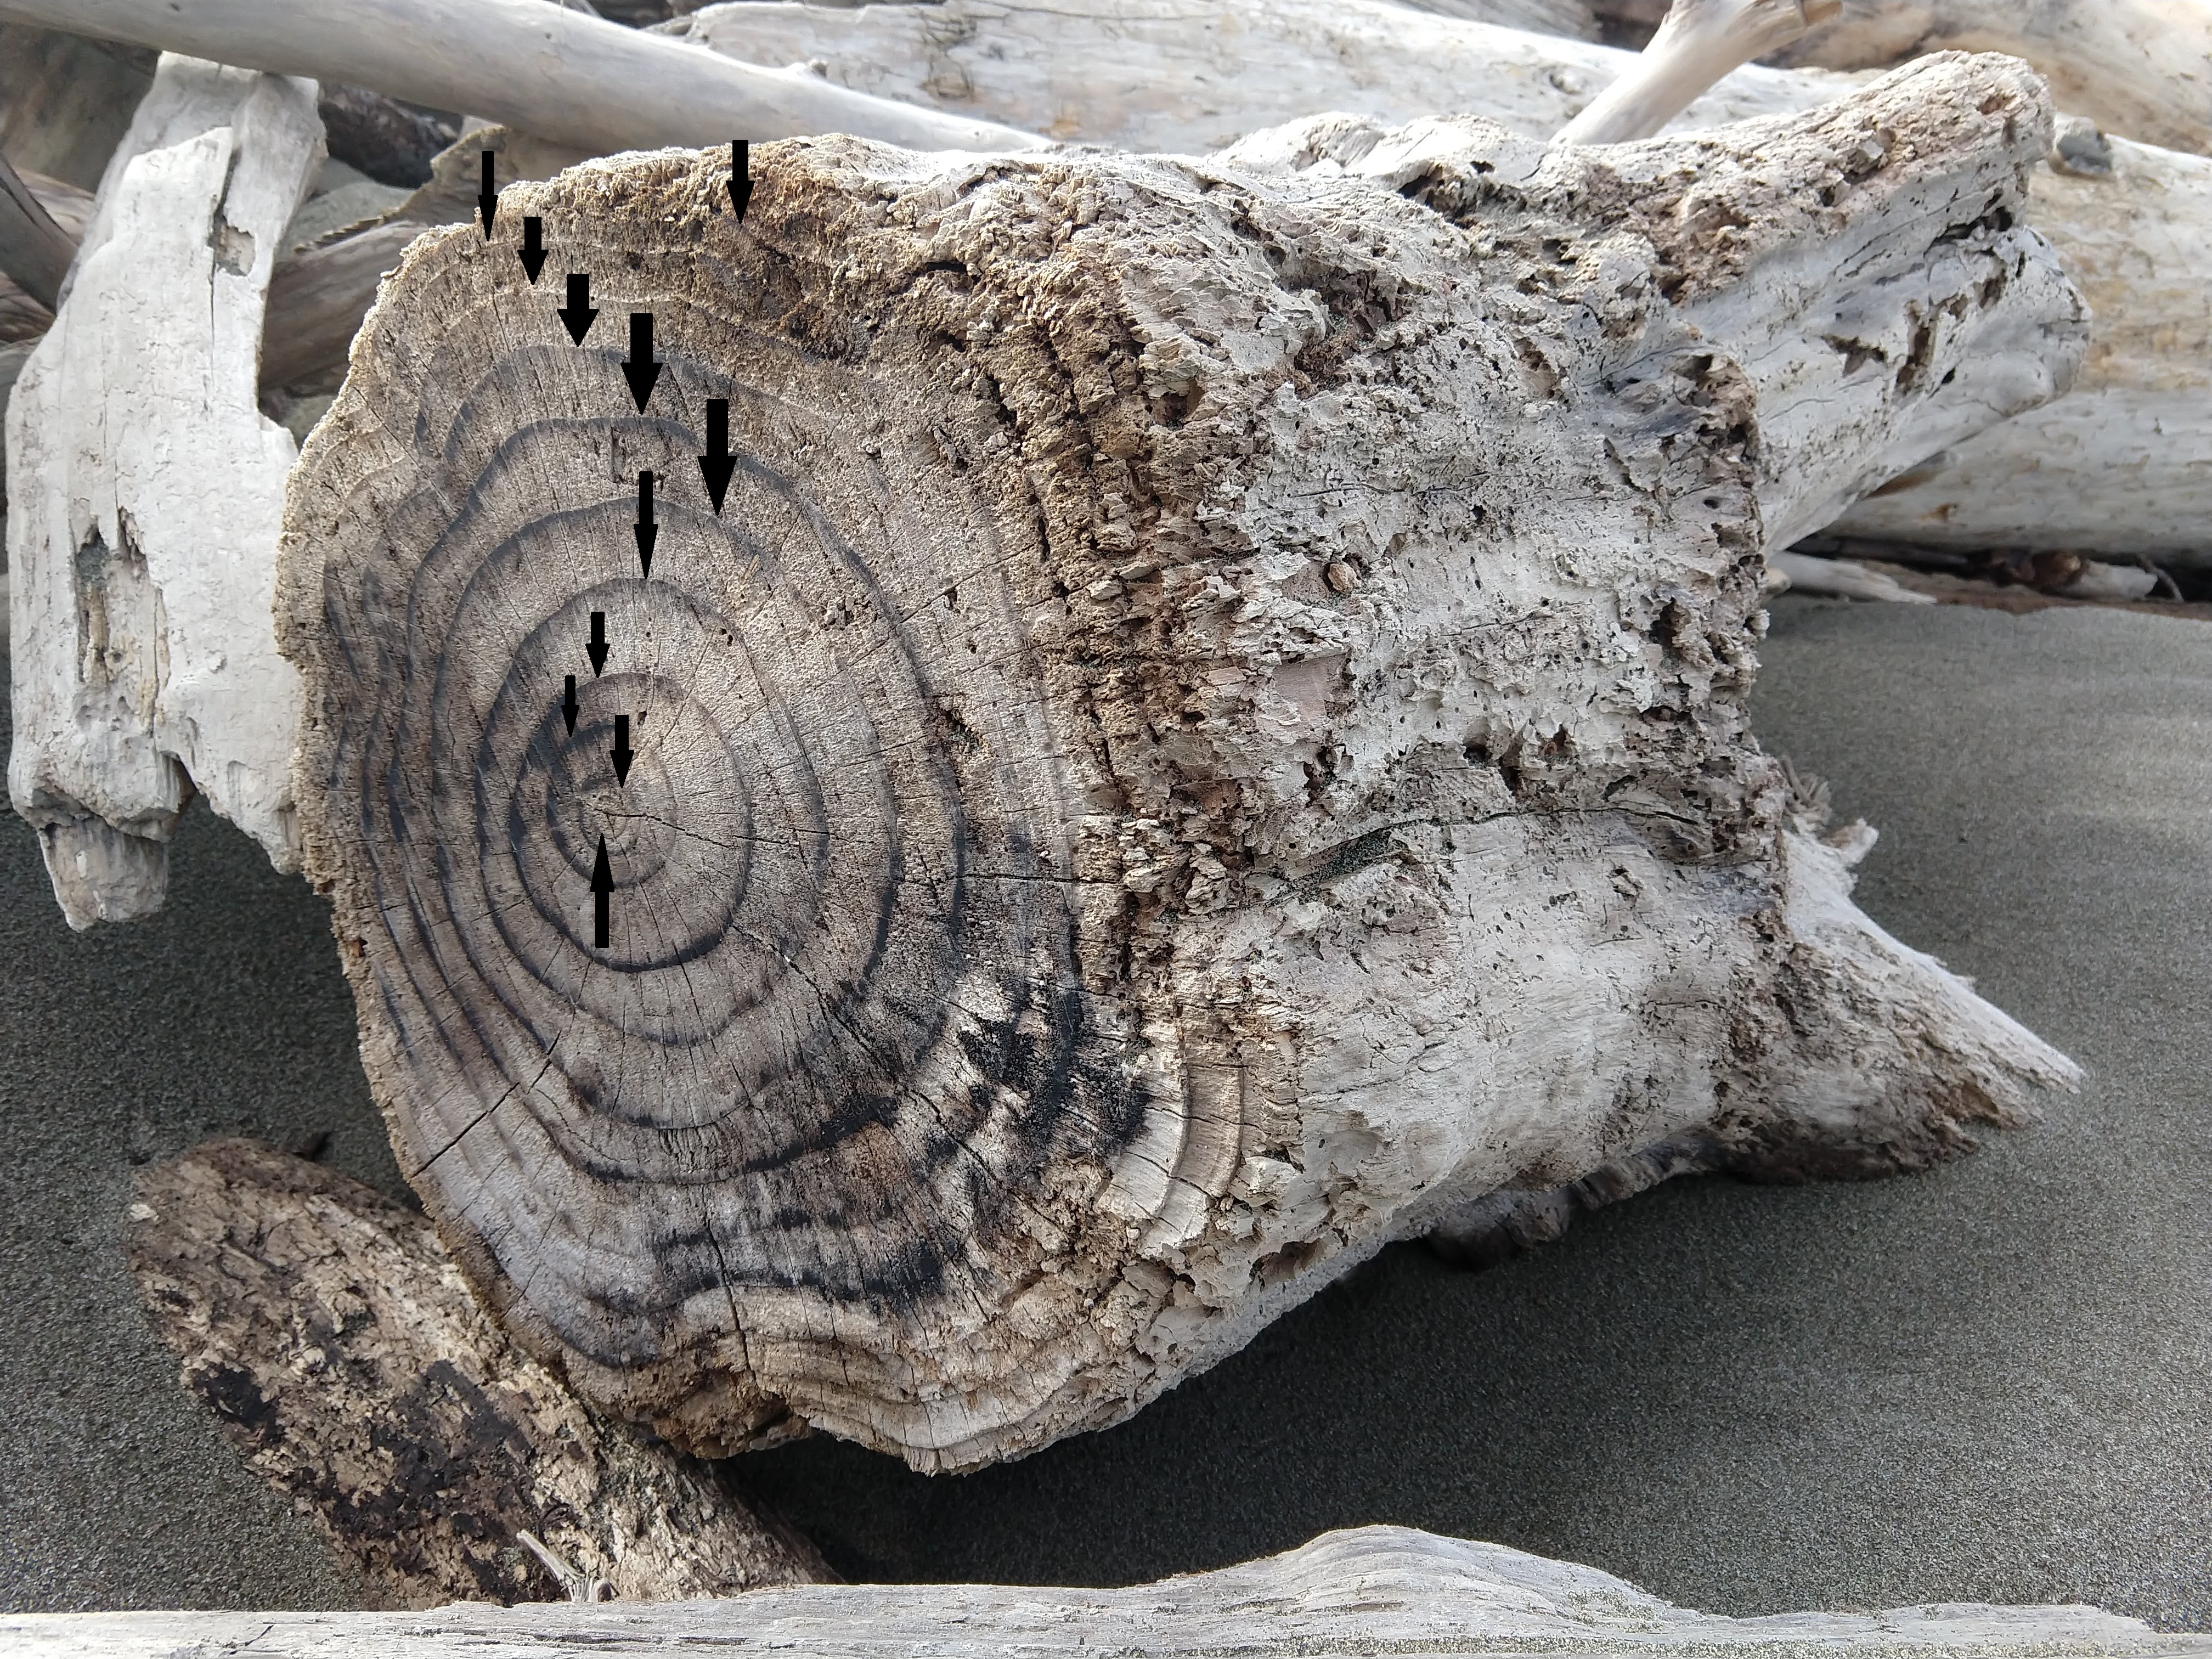 Annual growth rings on a driftwood stump, indicated by black arrows